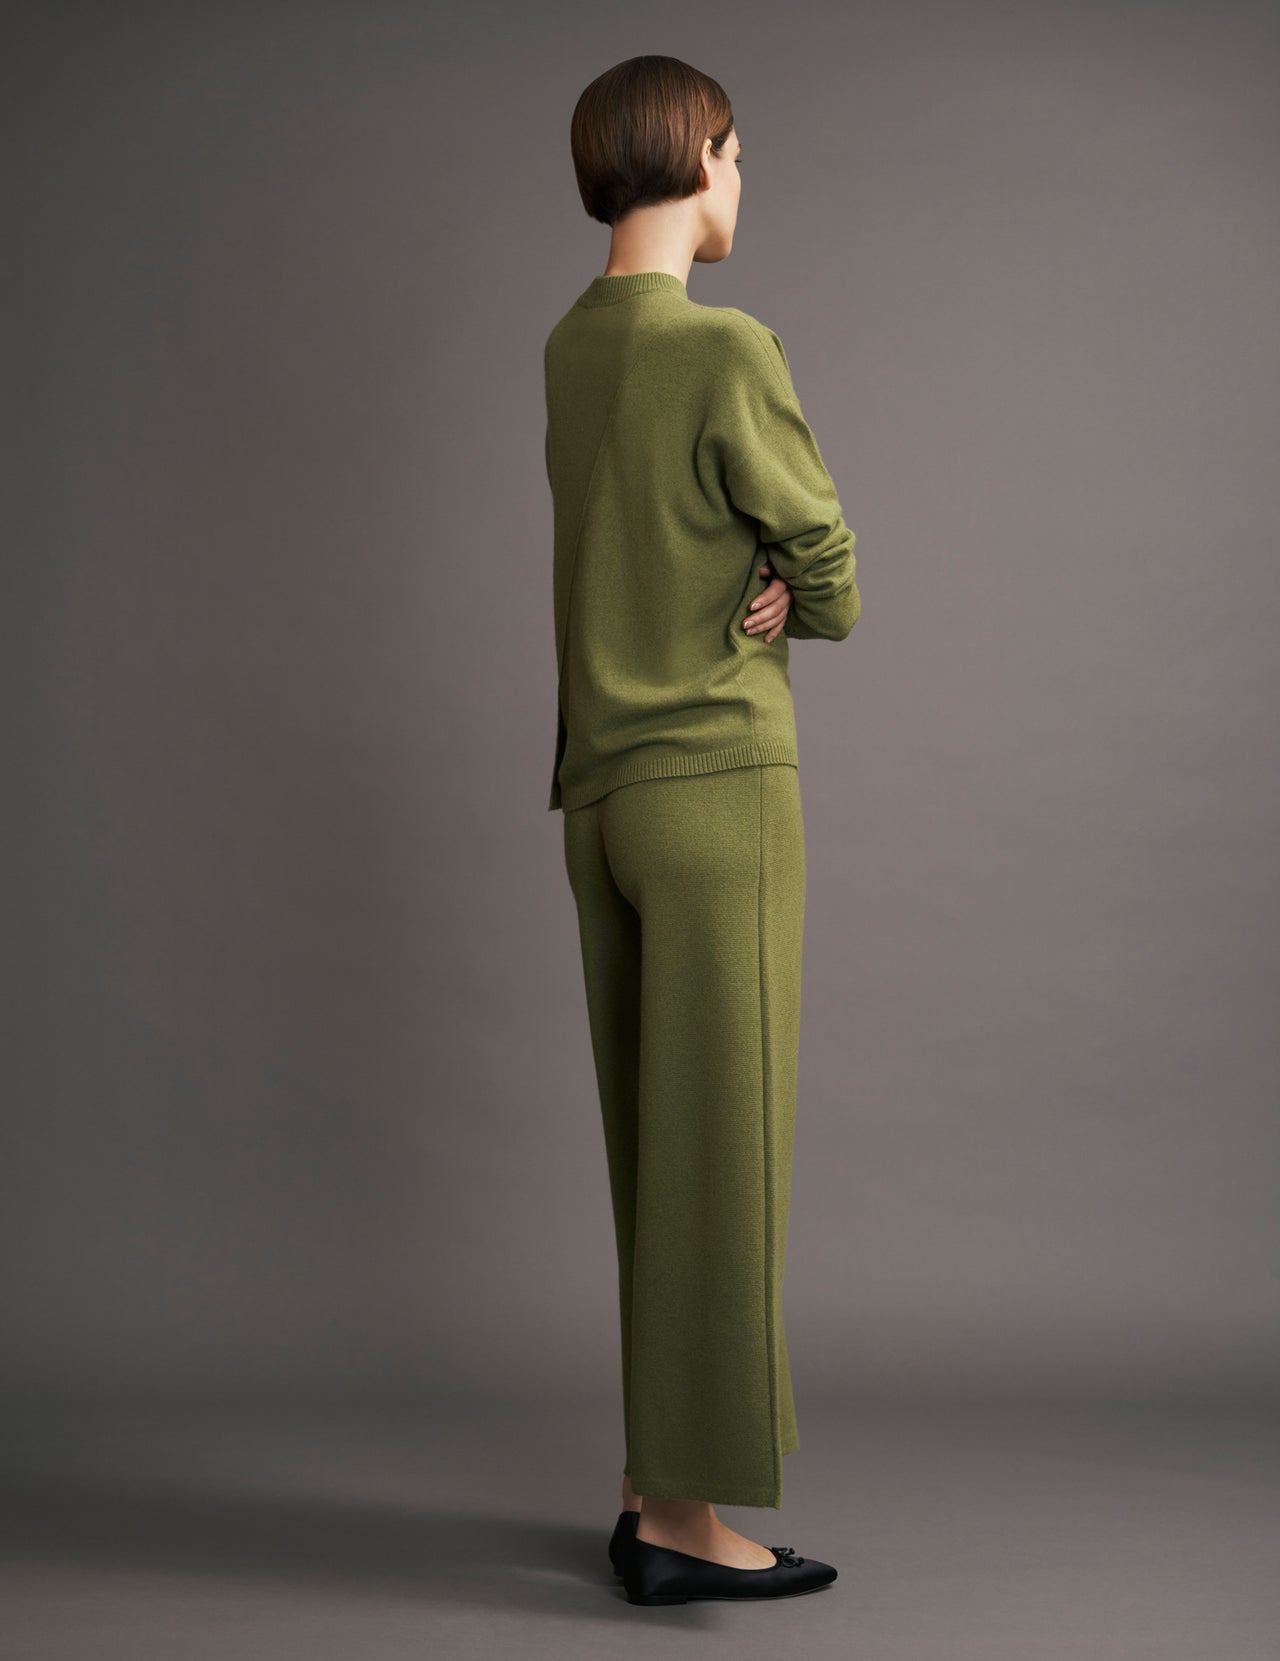  Bamboo Green Cropped Cashmere Straight Leg Trousers  